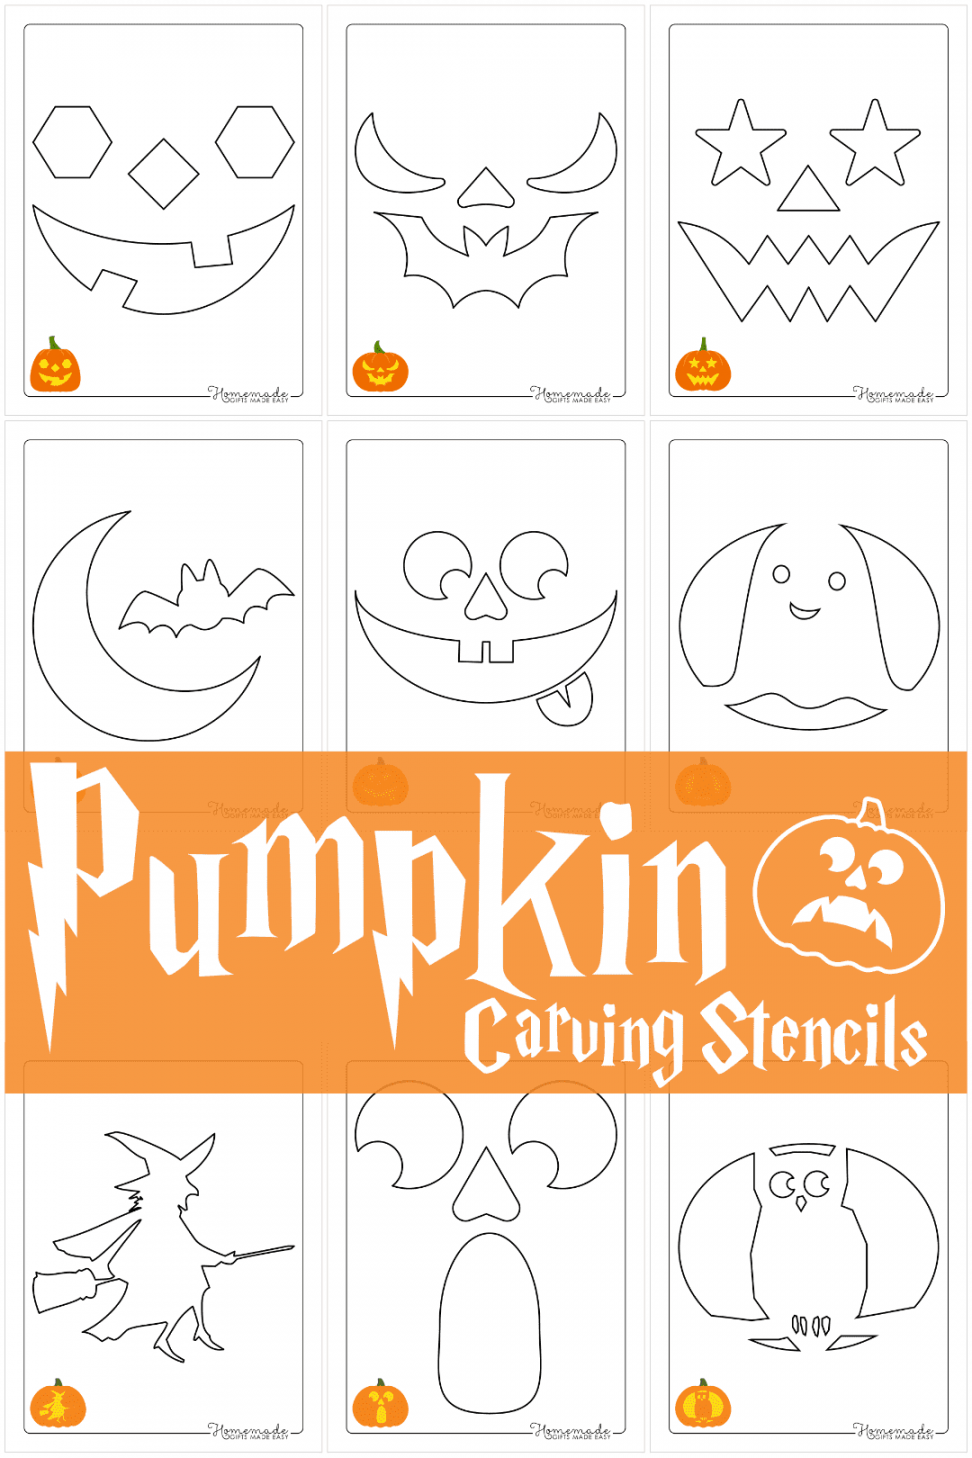 Free Printable Pumpkin Carving Stencils for Halloween - FREE Printables - Pumpkin Pattern Printable